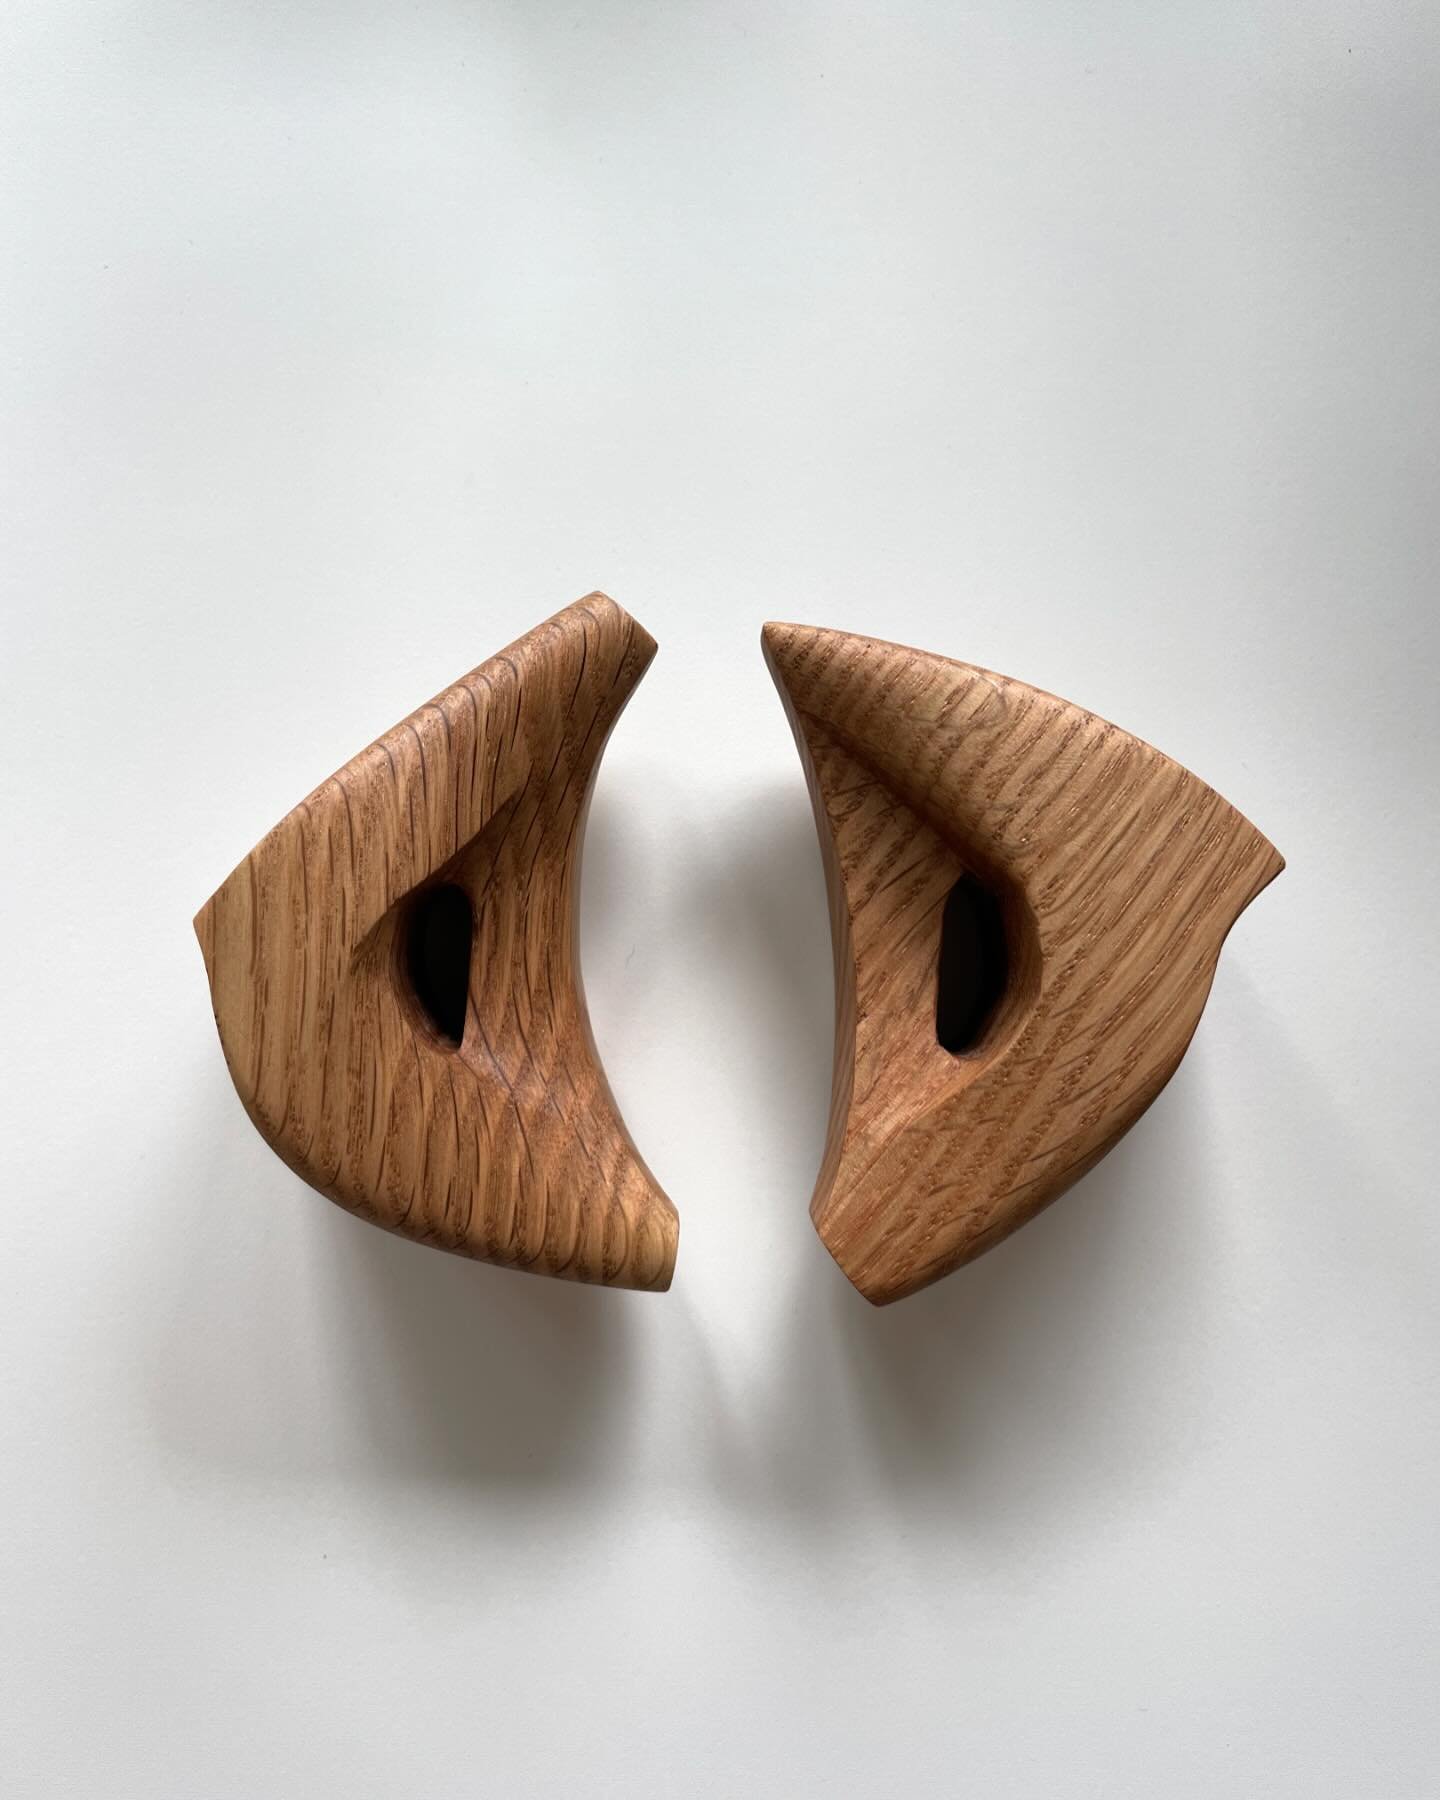 &ldquo;Dune/Drift&rdquo; - pair of red oak handles carved contemplating material marking time. Gentle curves worn inward by time folding over itself. The steady intimacy of erosion. Ages have passed by here leaving their fingerprints&hellip; soft wor